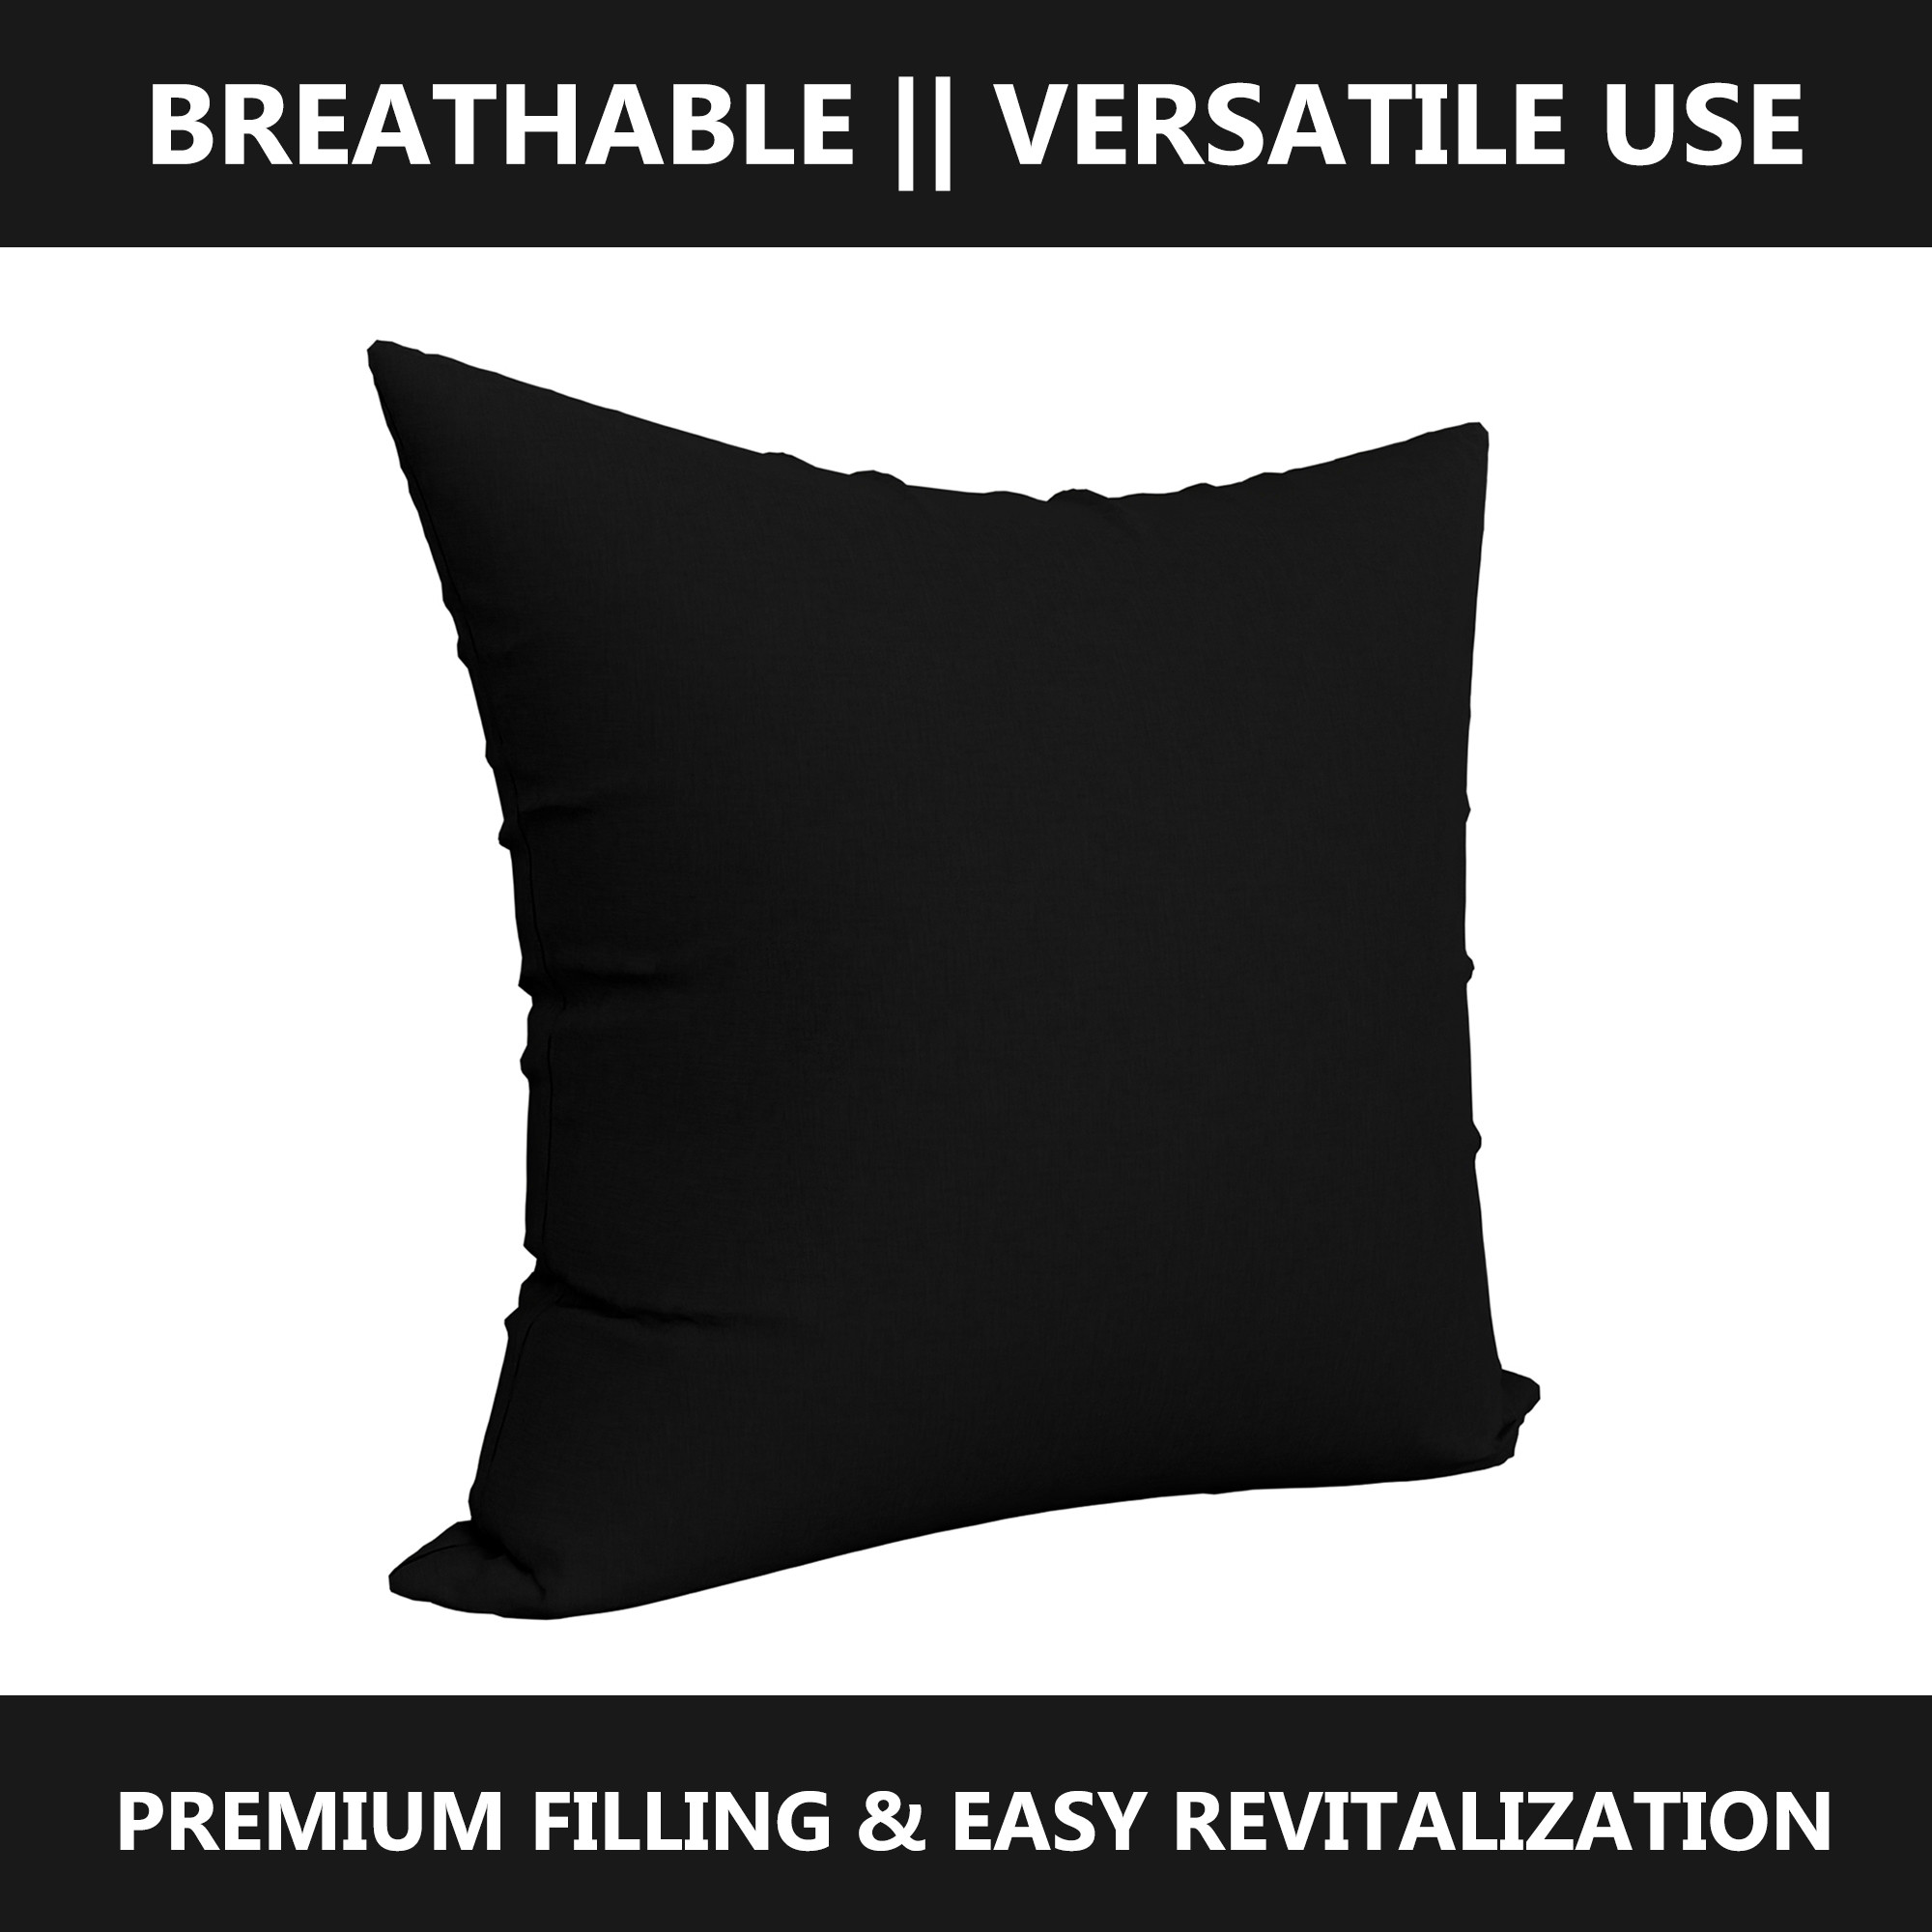 Kuber Industries Cushion Filler | Cotton Cushion Filler | Cushion For Sofa | Cushion Pillow Filler | Premium Sofa Cushion For Hotel-Bedroom | Washable & Odorless | 16 Inch | Black